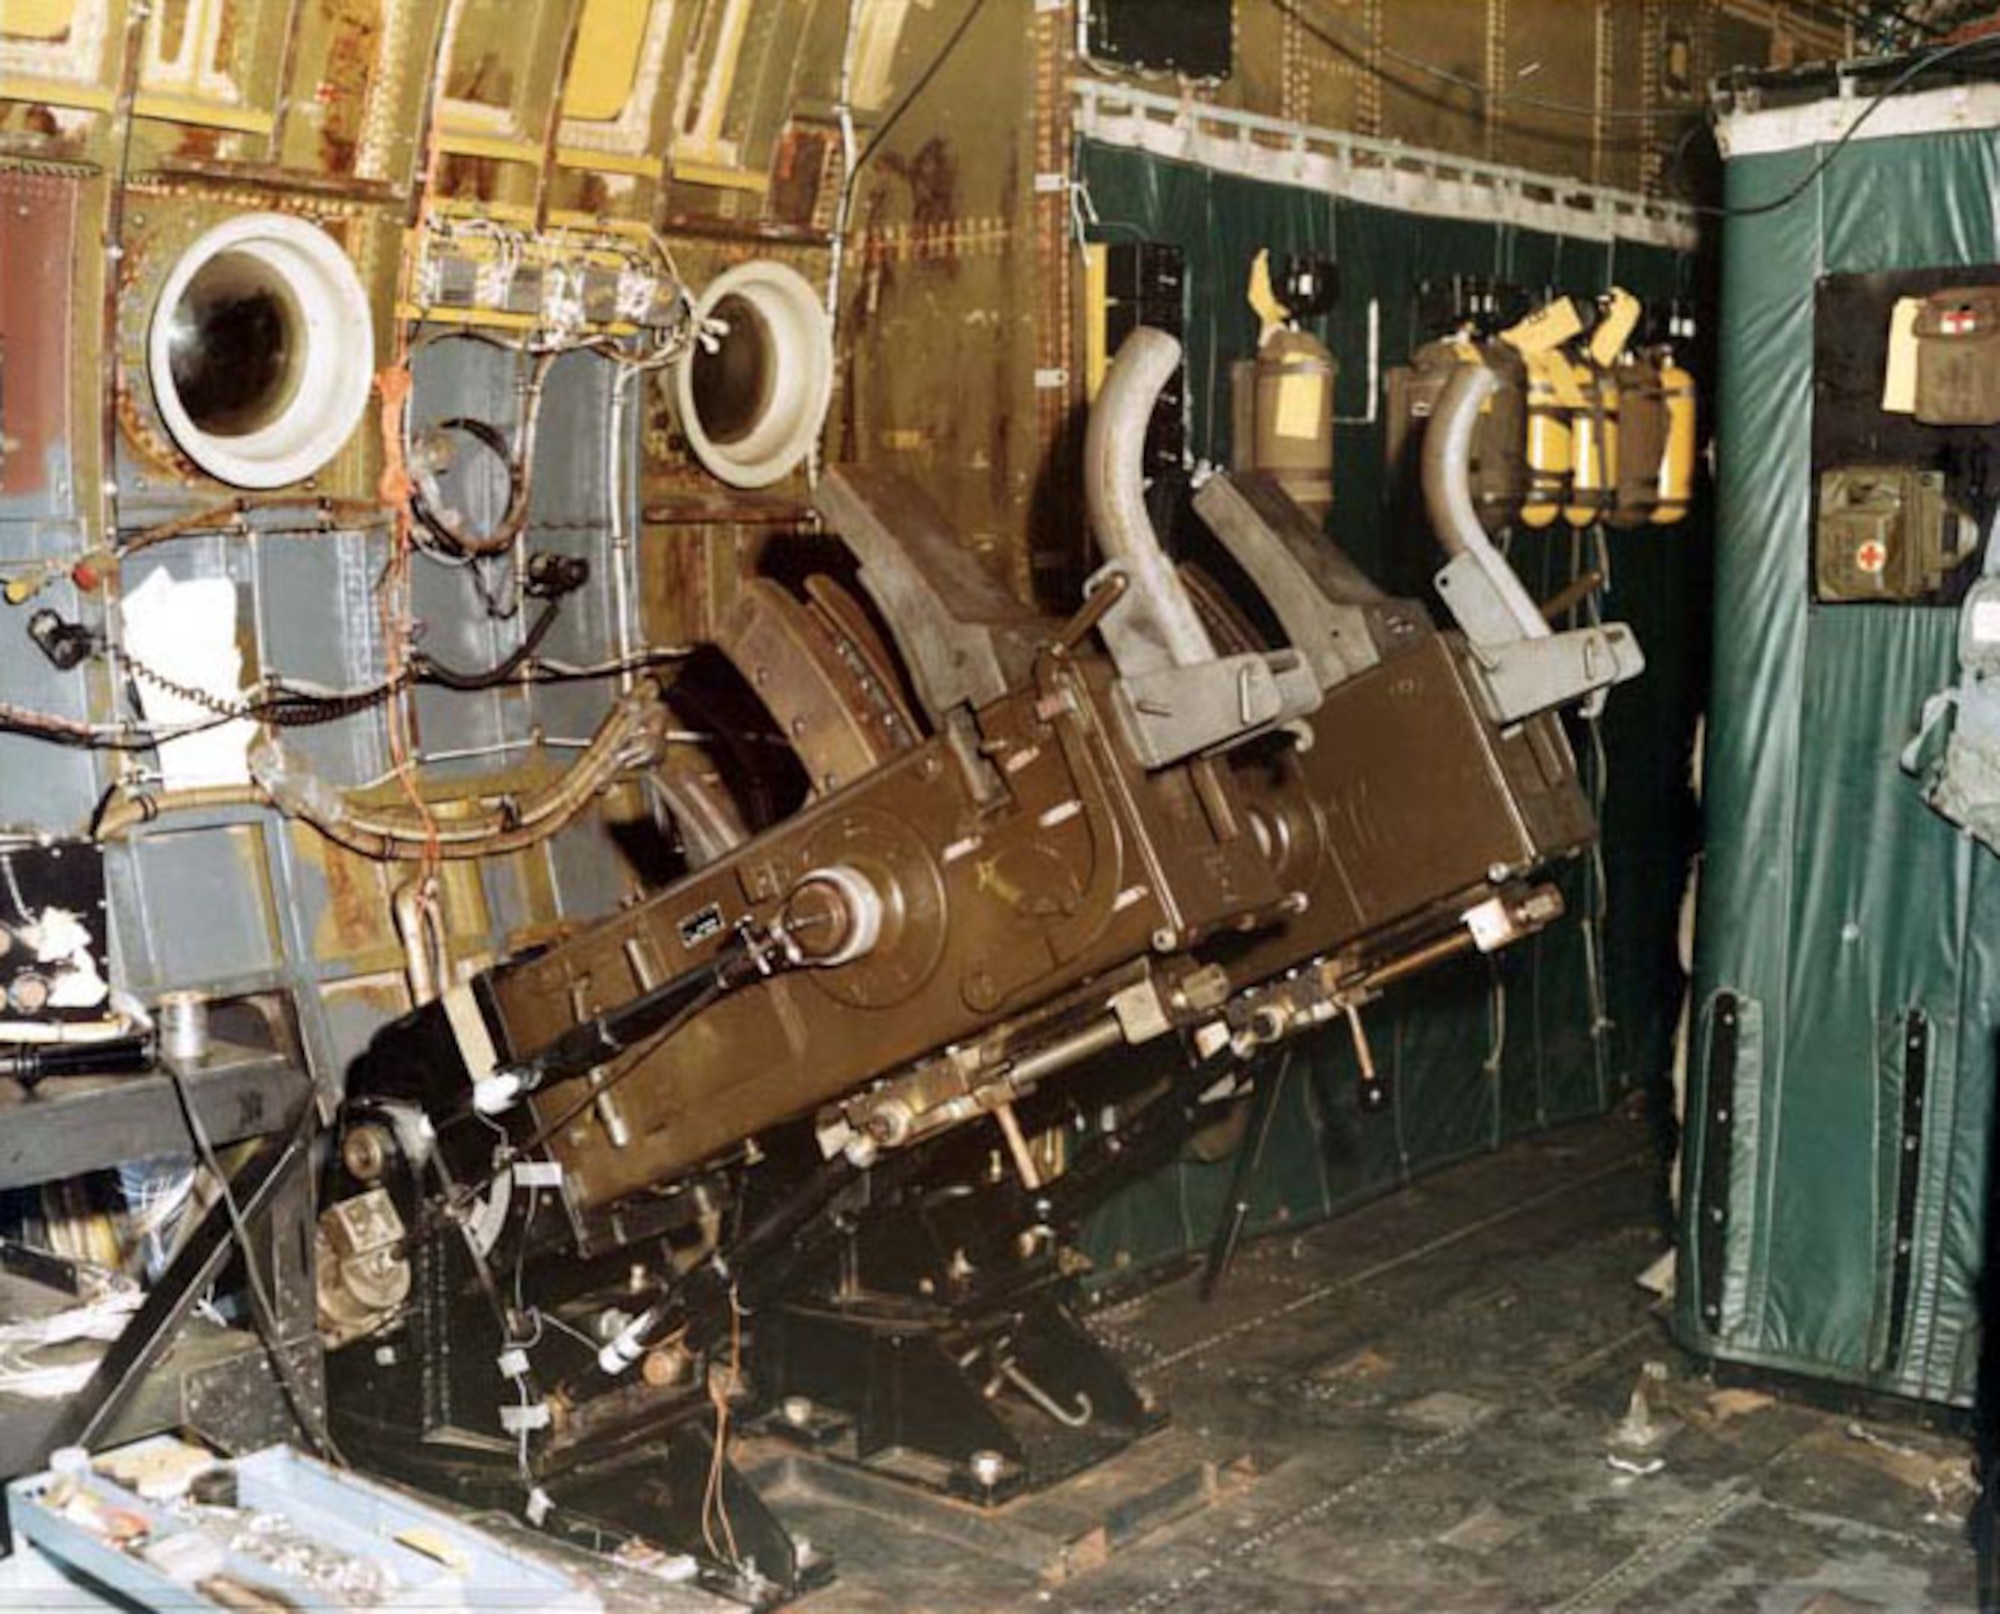 View of the 40mm guns on an AC-130 from the inside of the aircraft. (U.S. Air Force photo)